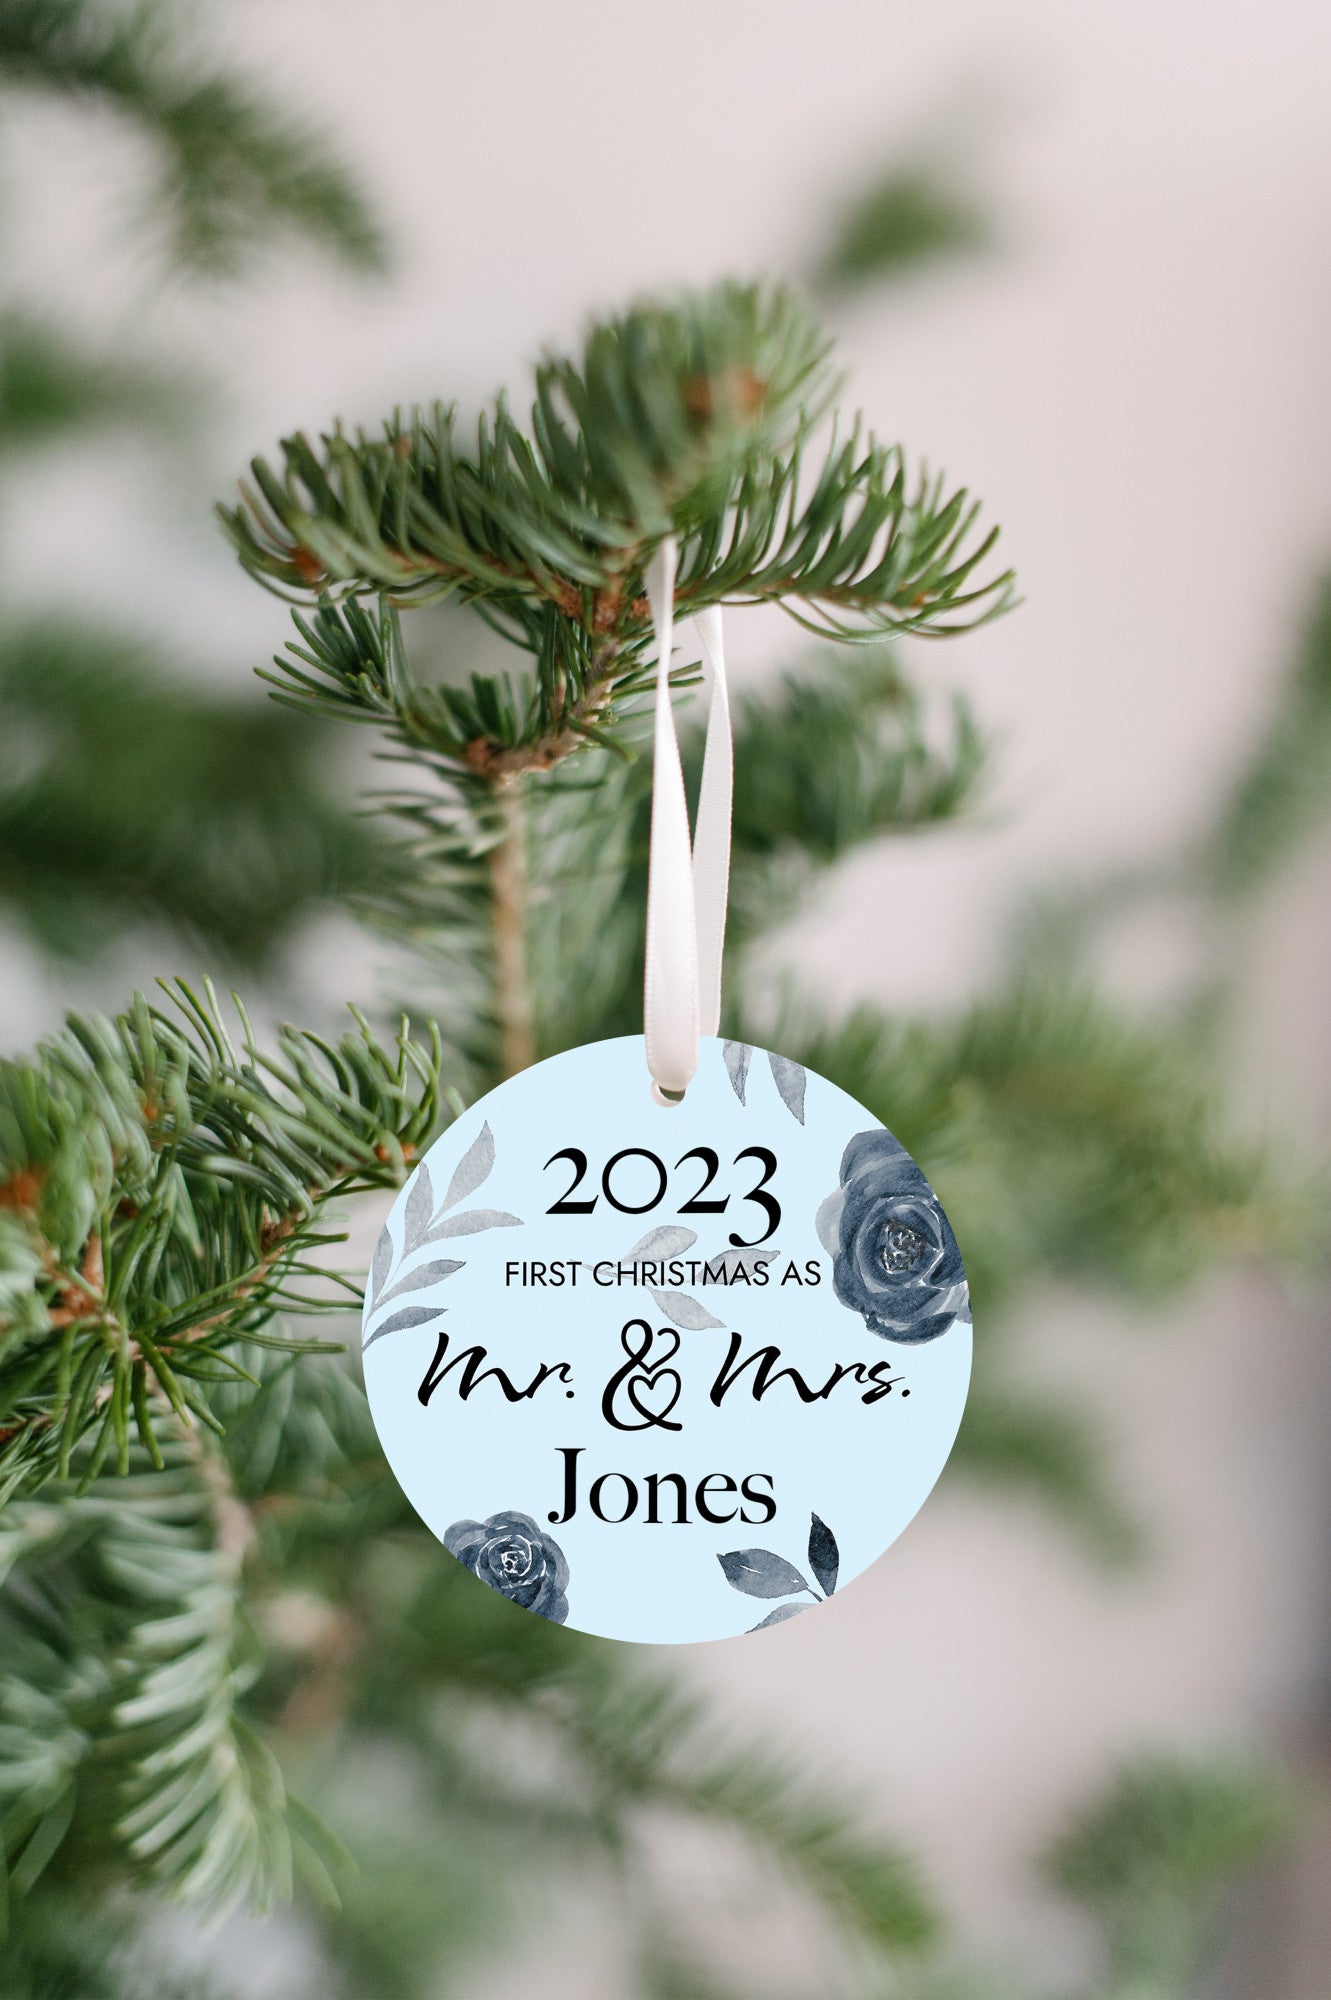 2023 First Christmas as Mr. & Mrs. Ornament